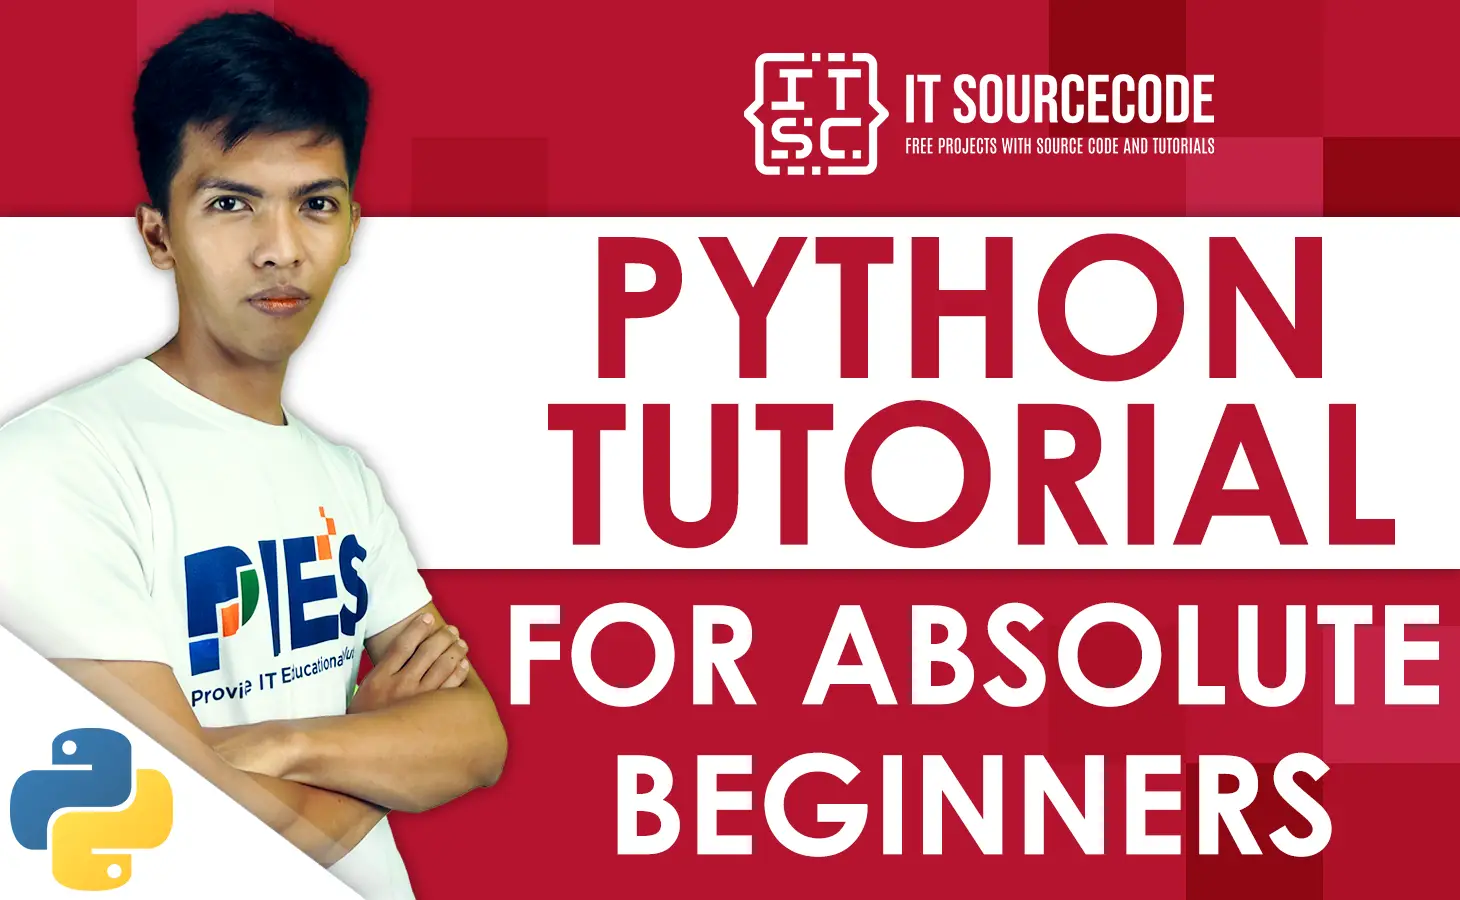 Python Tutorial for Absolute Beginners - Introduction